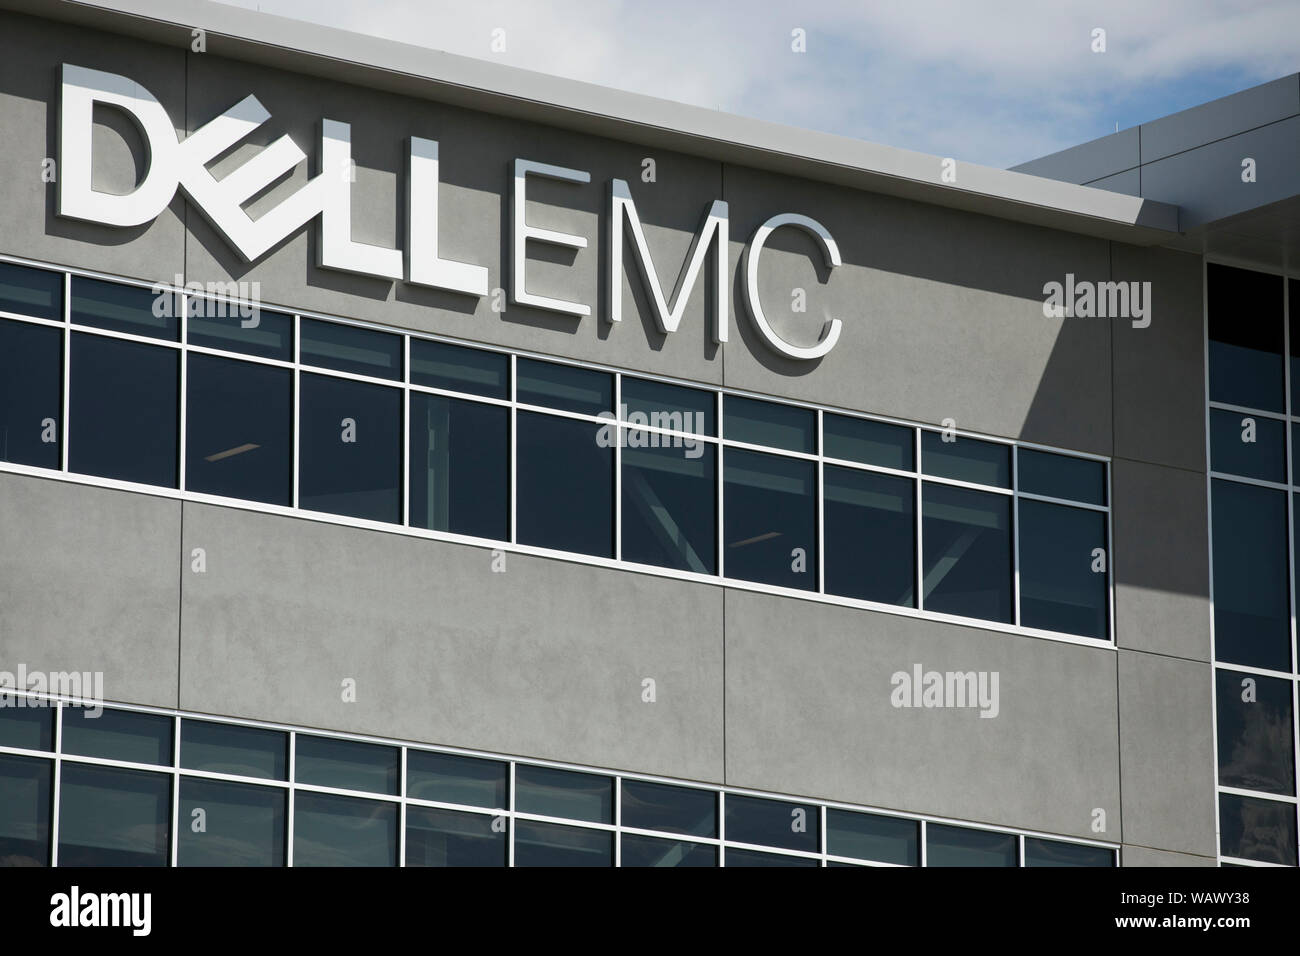 A logo sign outside of a facility occupied by Dell EMC in Draper, Utah on July 27, 2019. Stock Photo